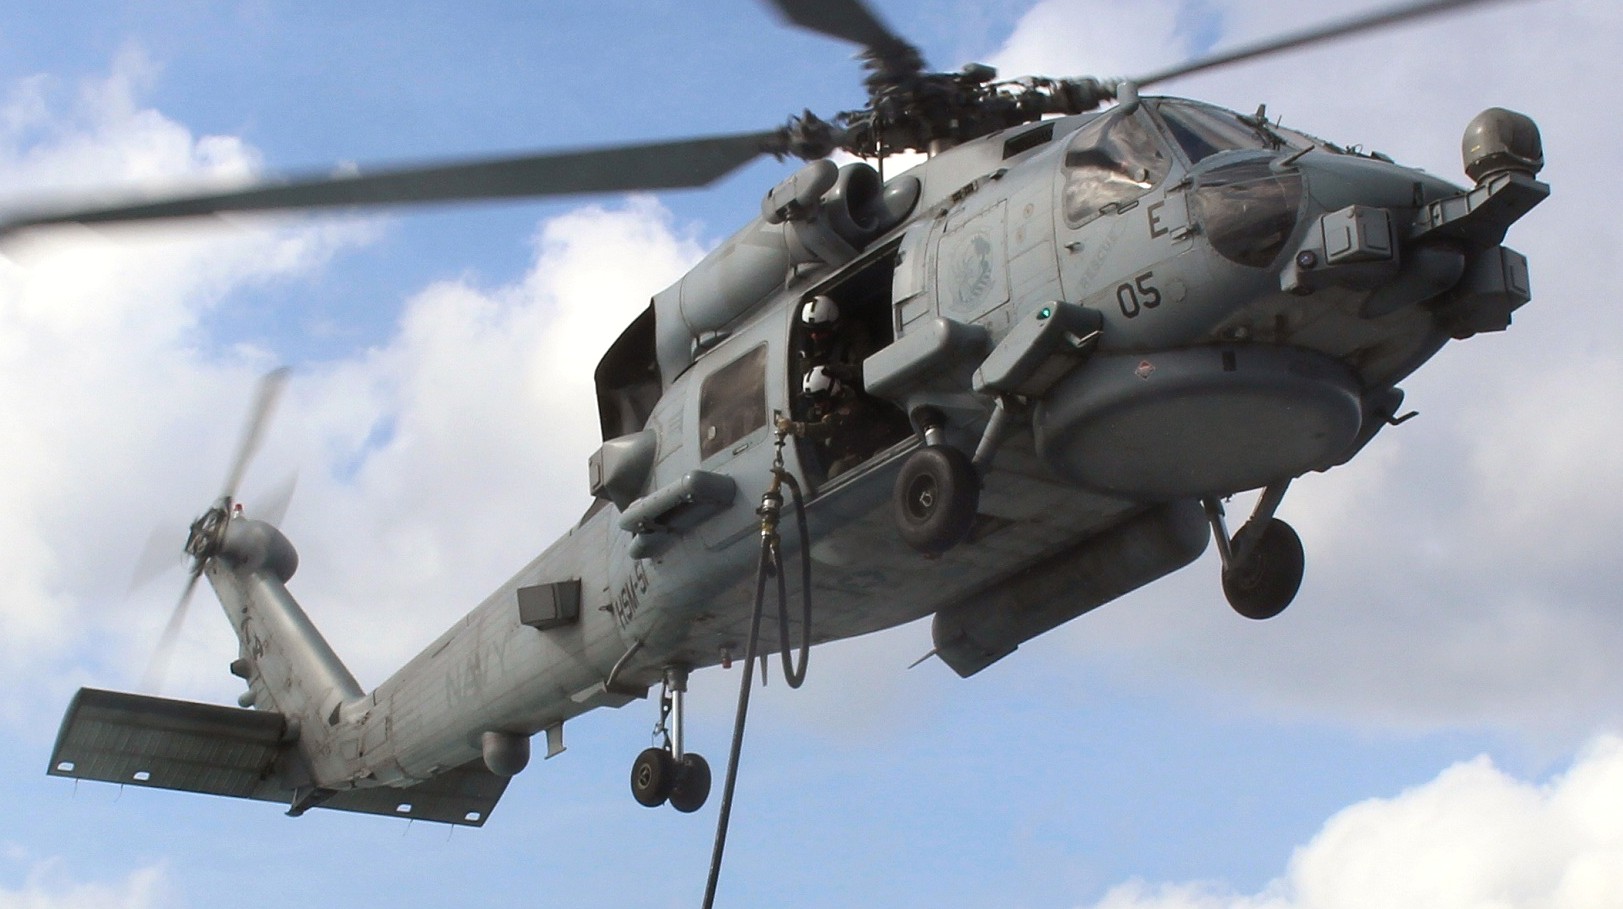 hsm-51 warlords helicopter maritime strike squadron mh-60r seahawk navy 2015 49